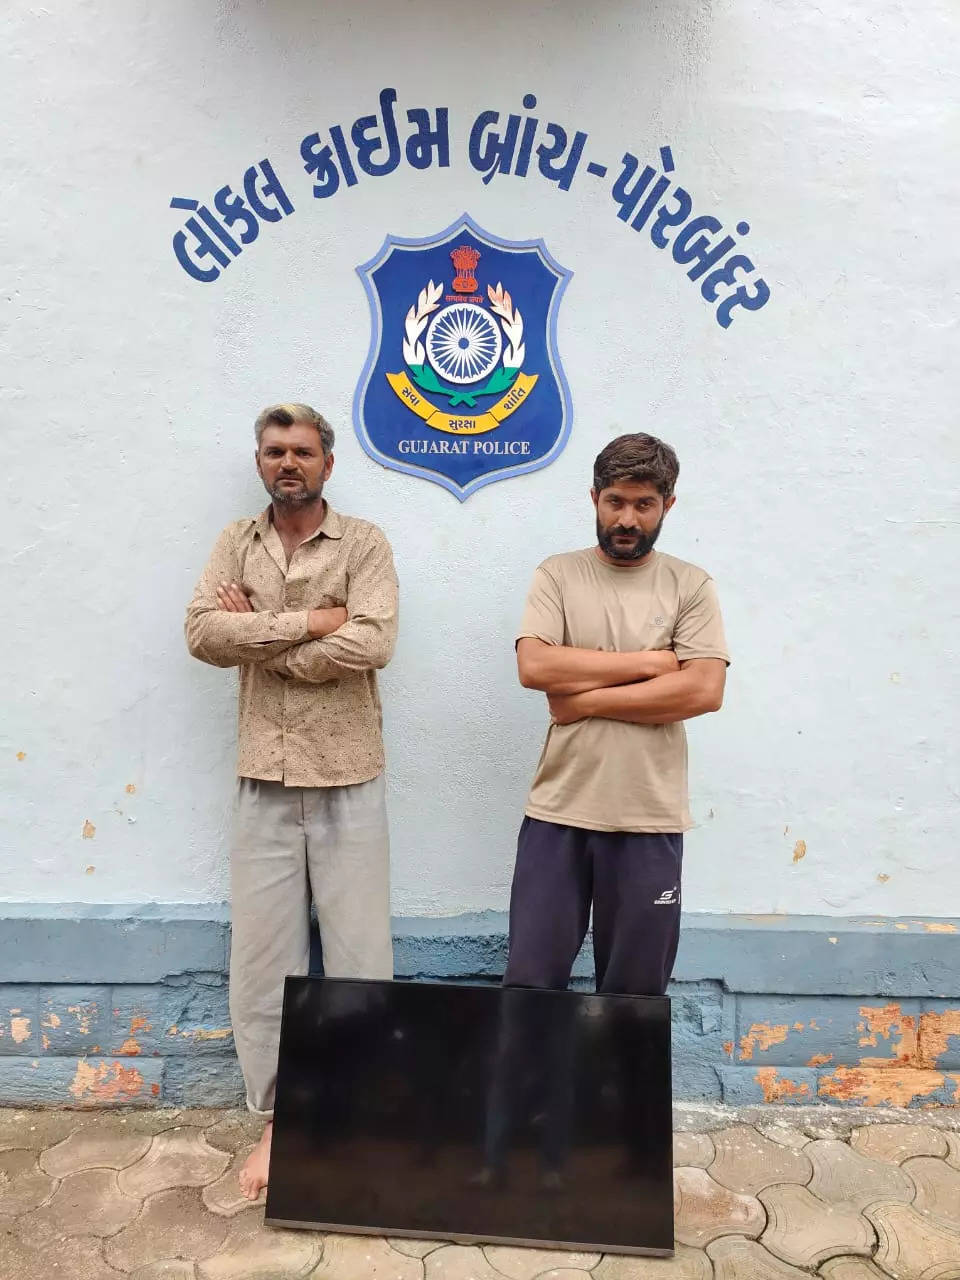 Ten years later: Gujarat cousins arrested for decade-old school TV theft